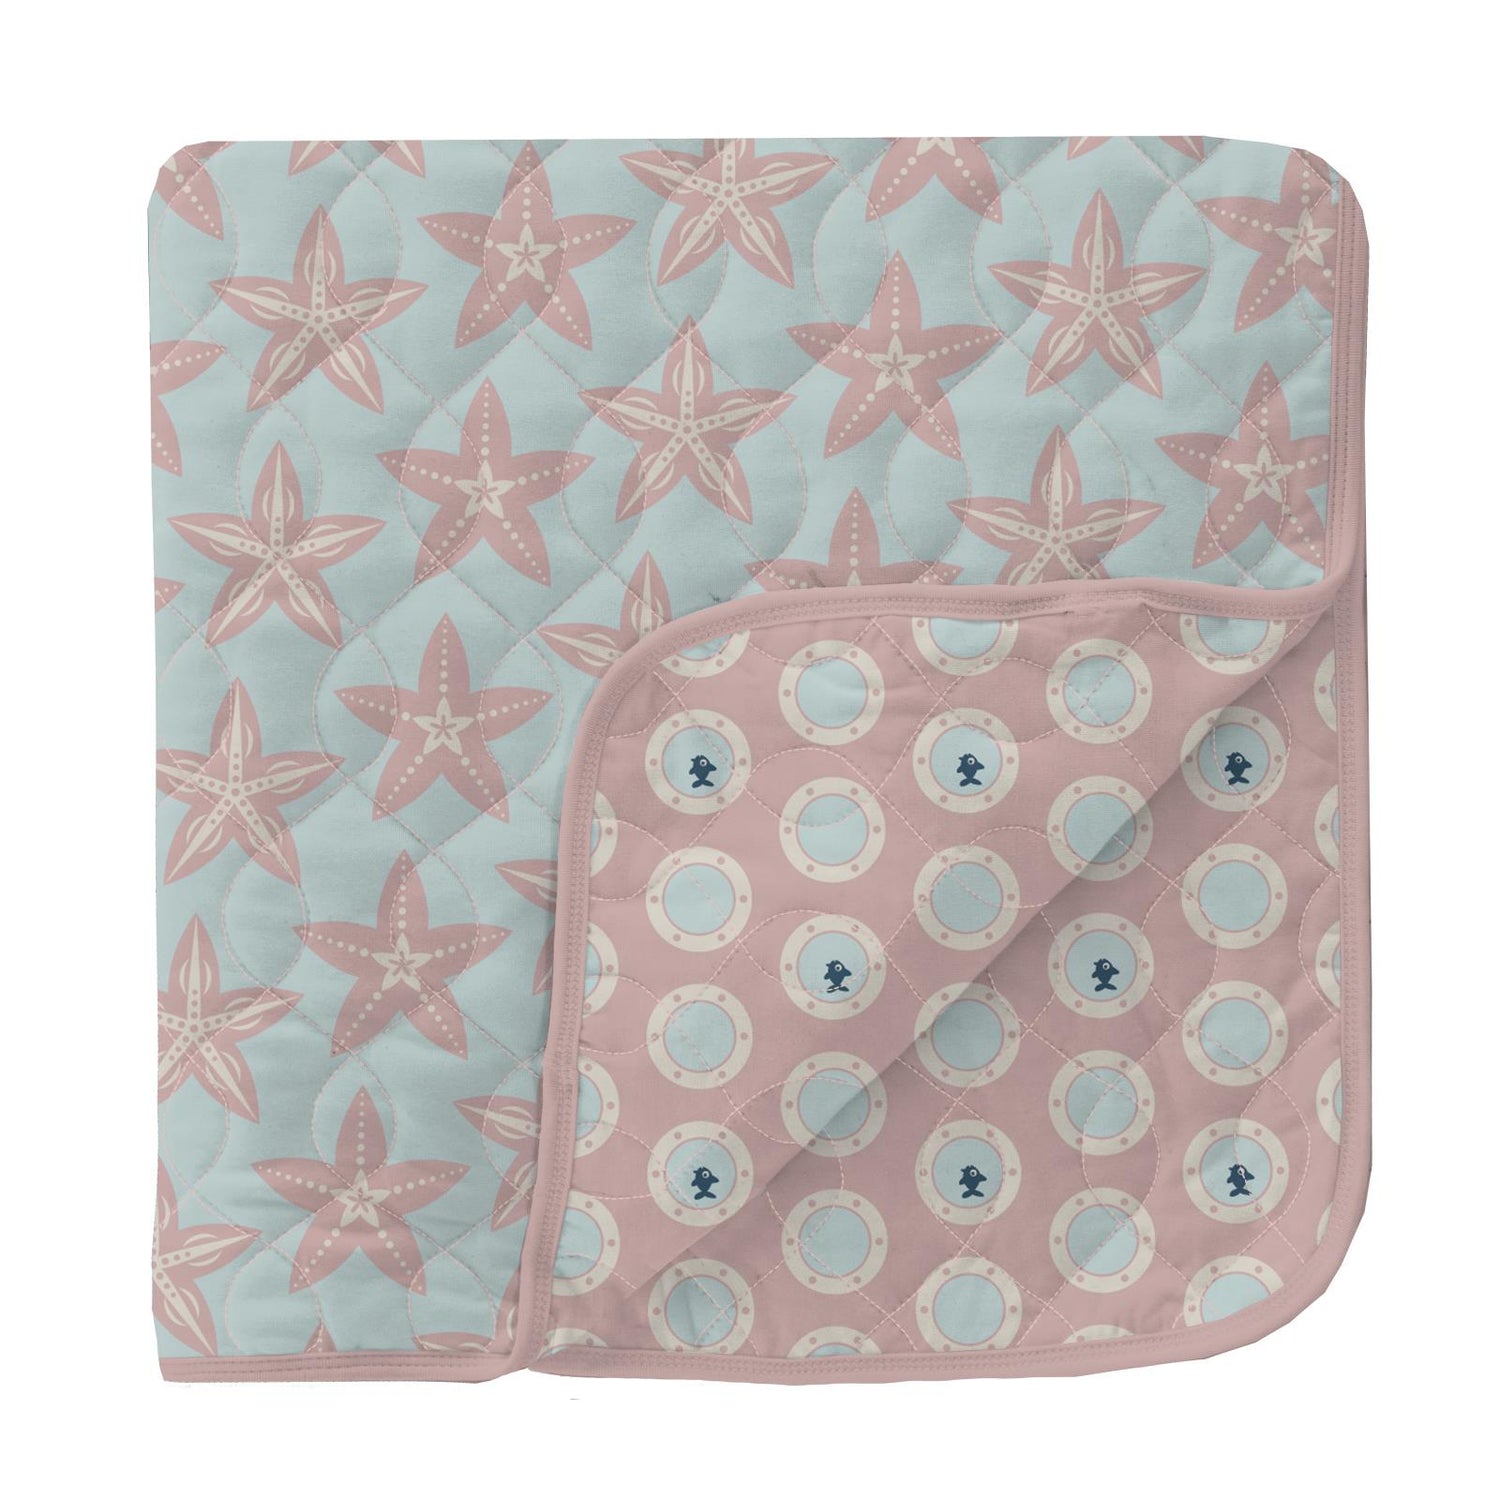 Print Quilted Toddler Blanket in Fresh Air Fancy Starfish/Baby Rose Porthole